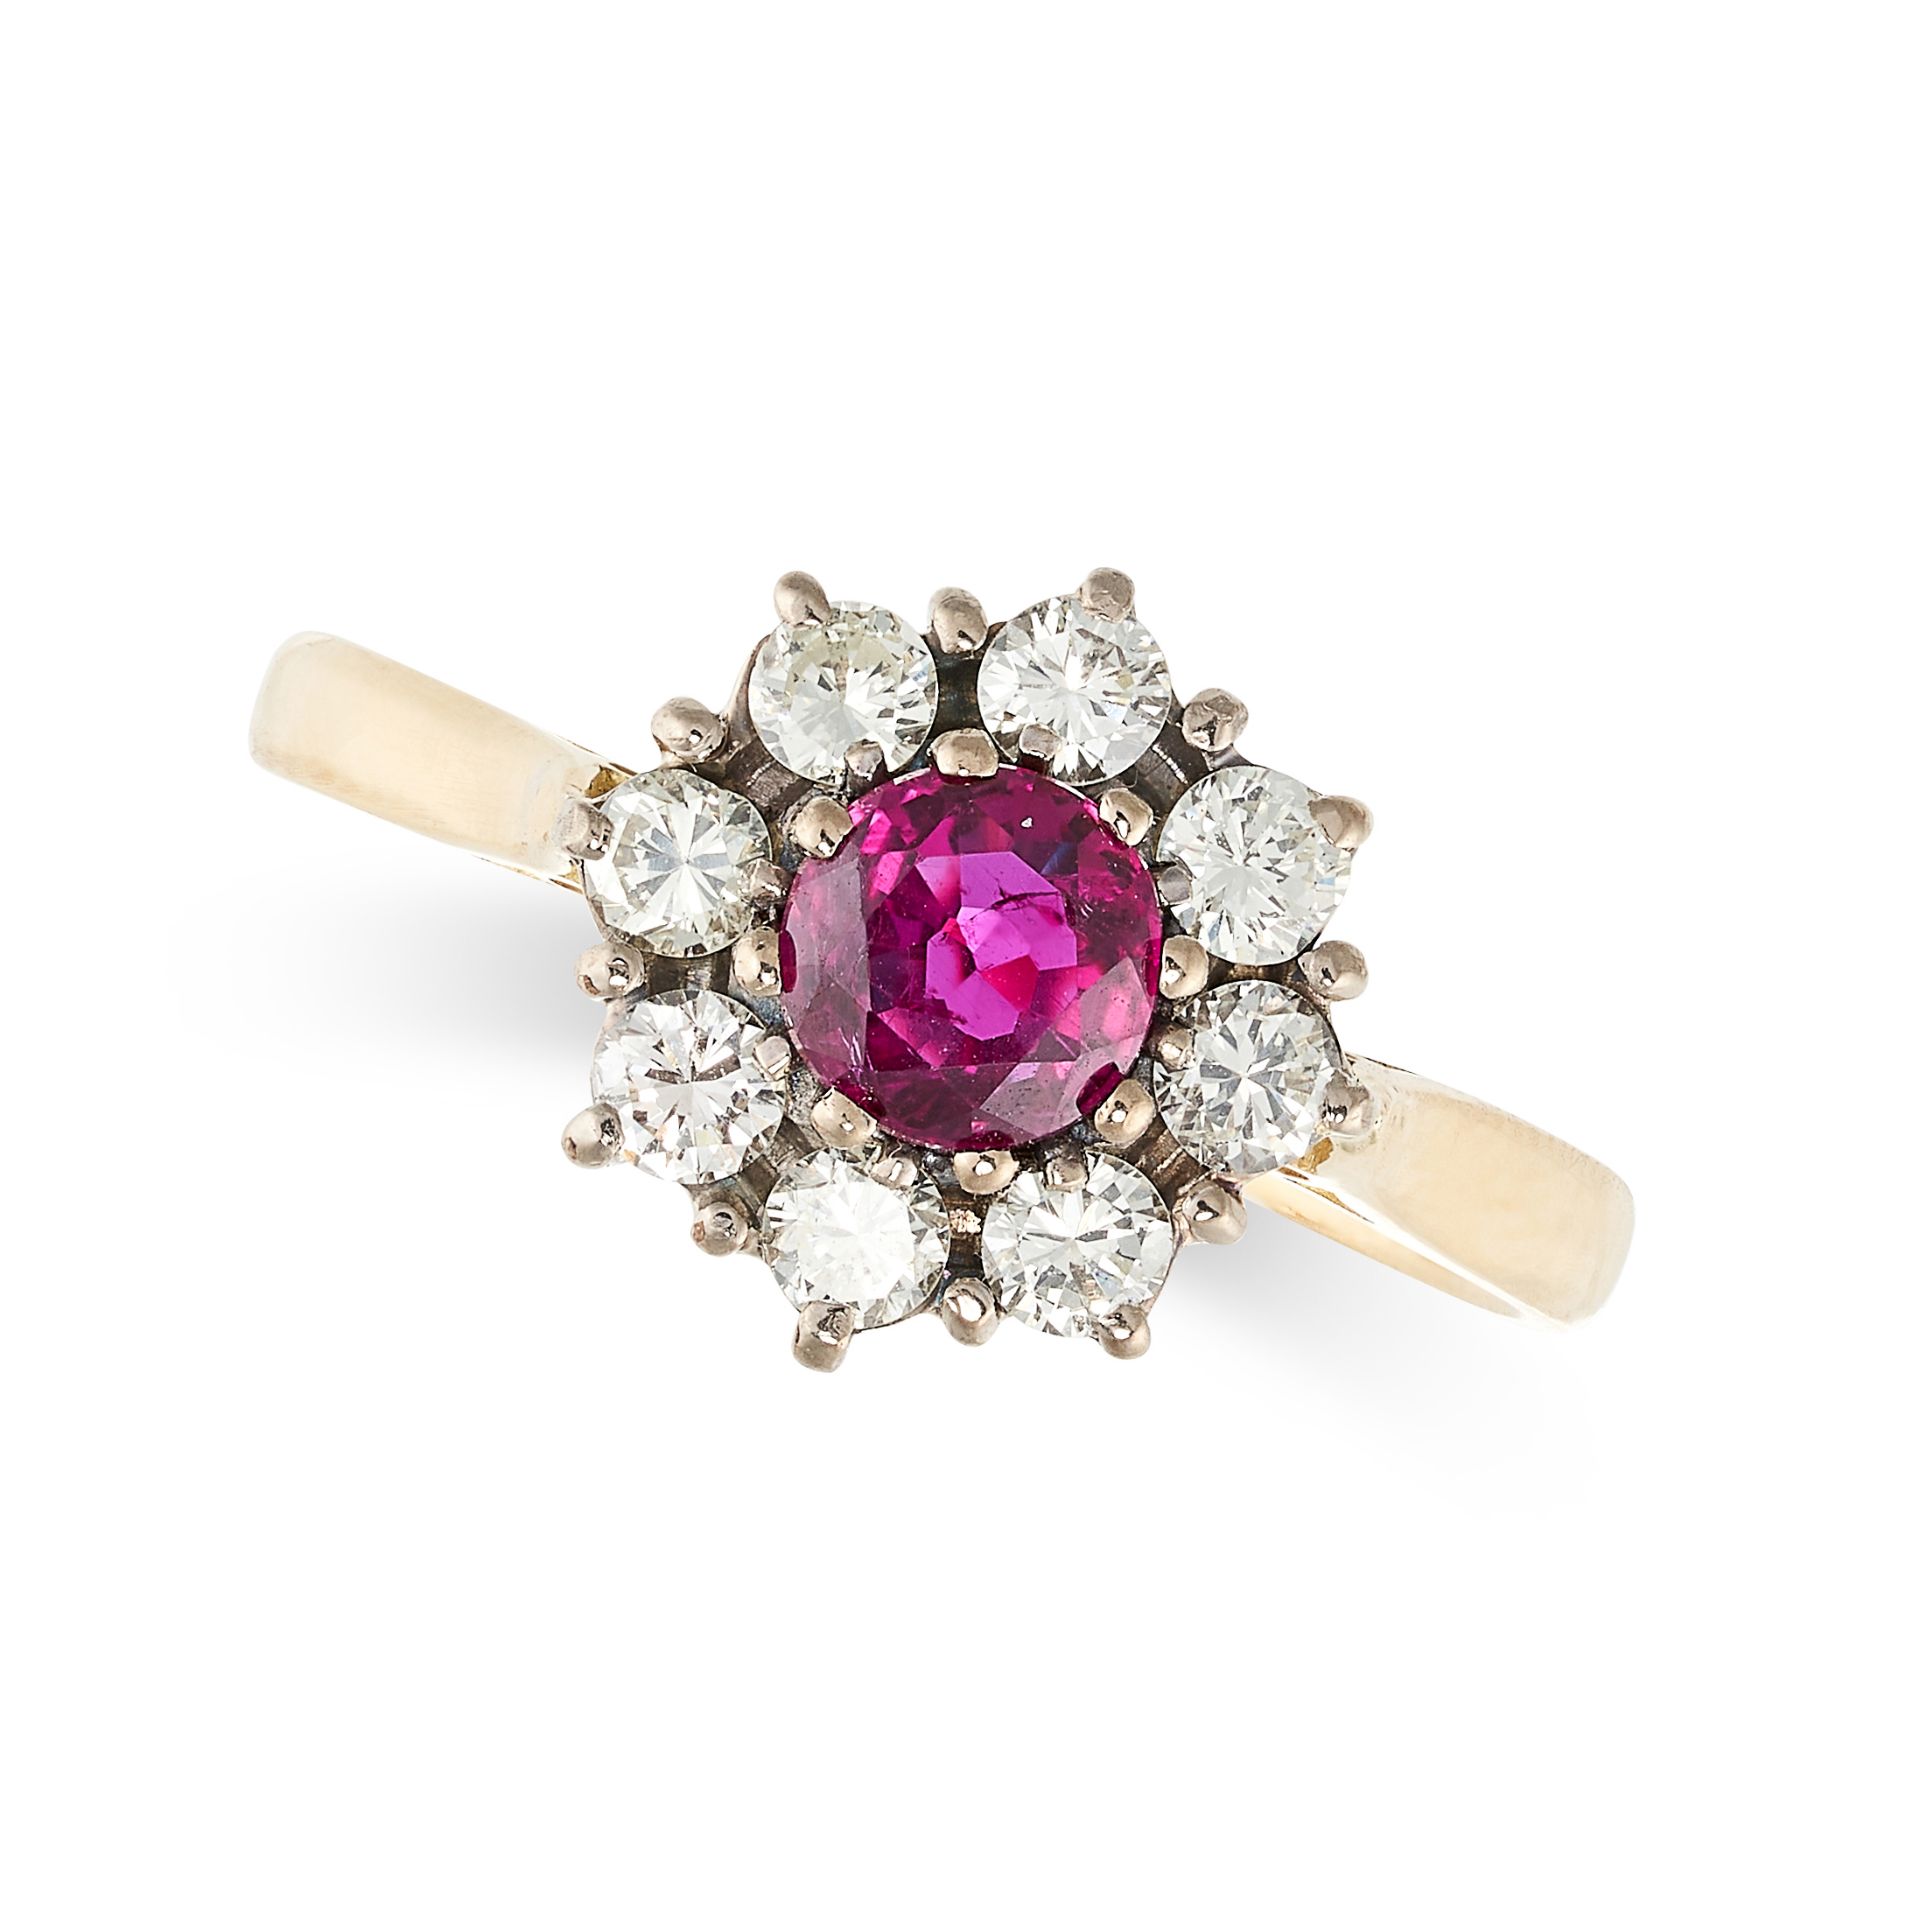 AN UNHEATED RUBY AND DIAMOND DRESS RING in 18ct yellow gold, set with a round cut ruby of 0.61